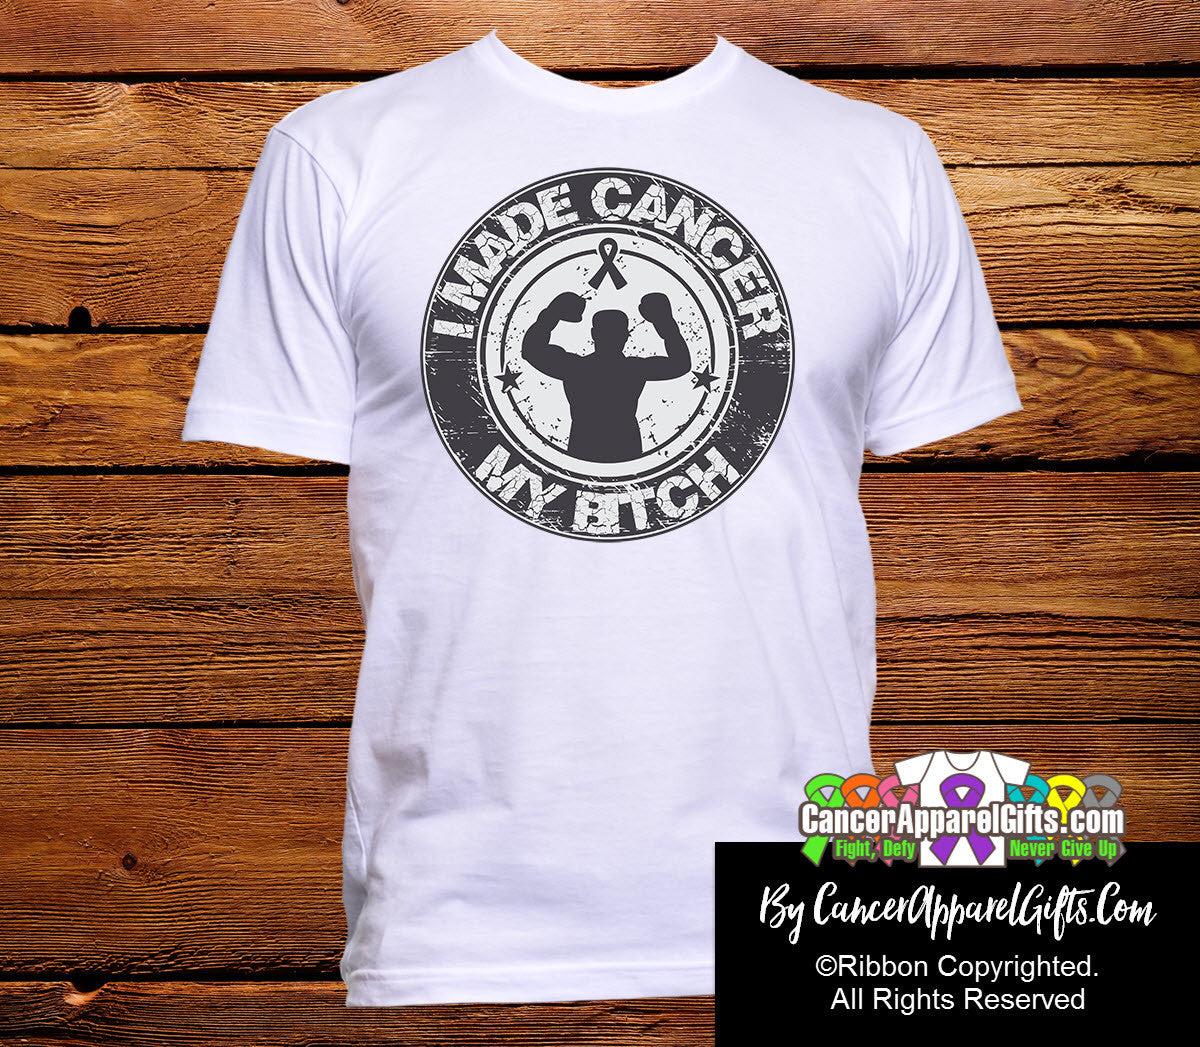 I Made Cancer My Bitch Shirts With Boxing Champ - Cancer Apparel and Gifts